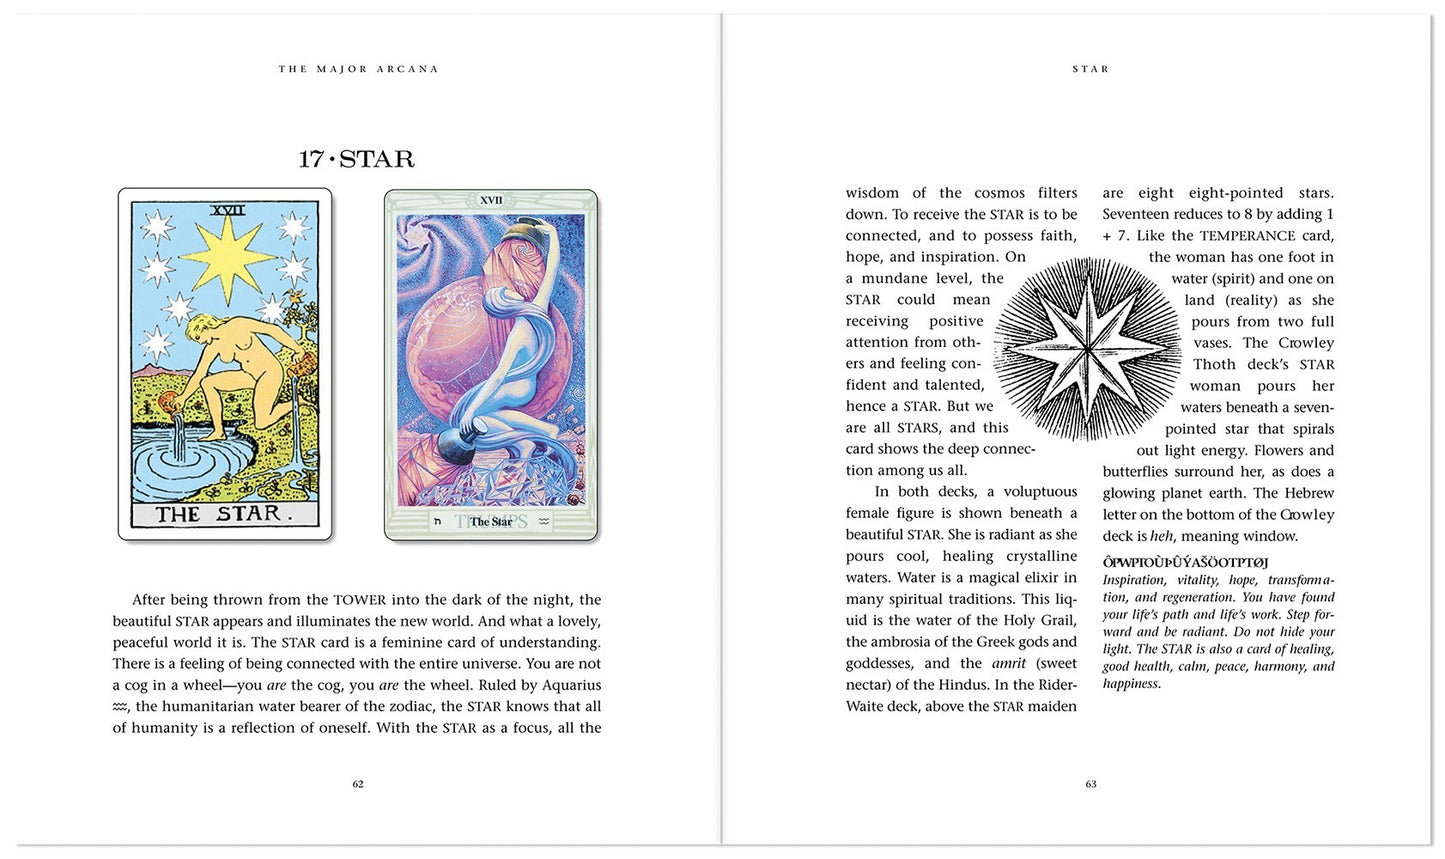 Inside view of The Star chapter of booklet